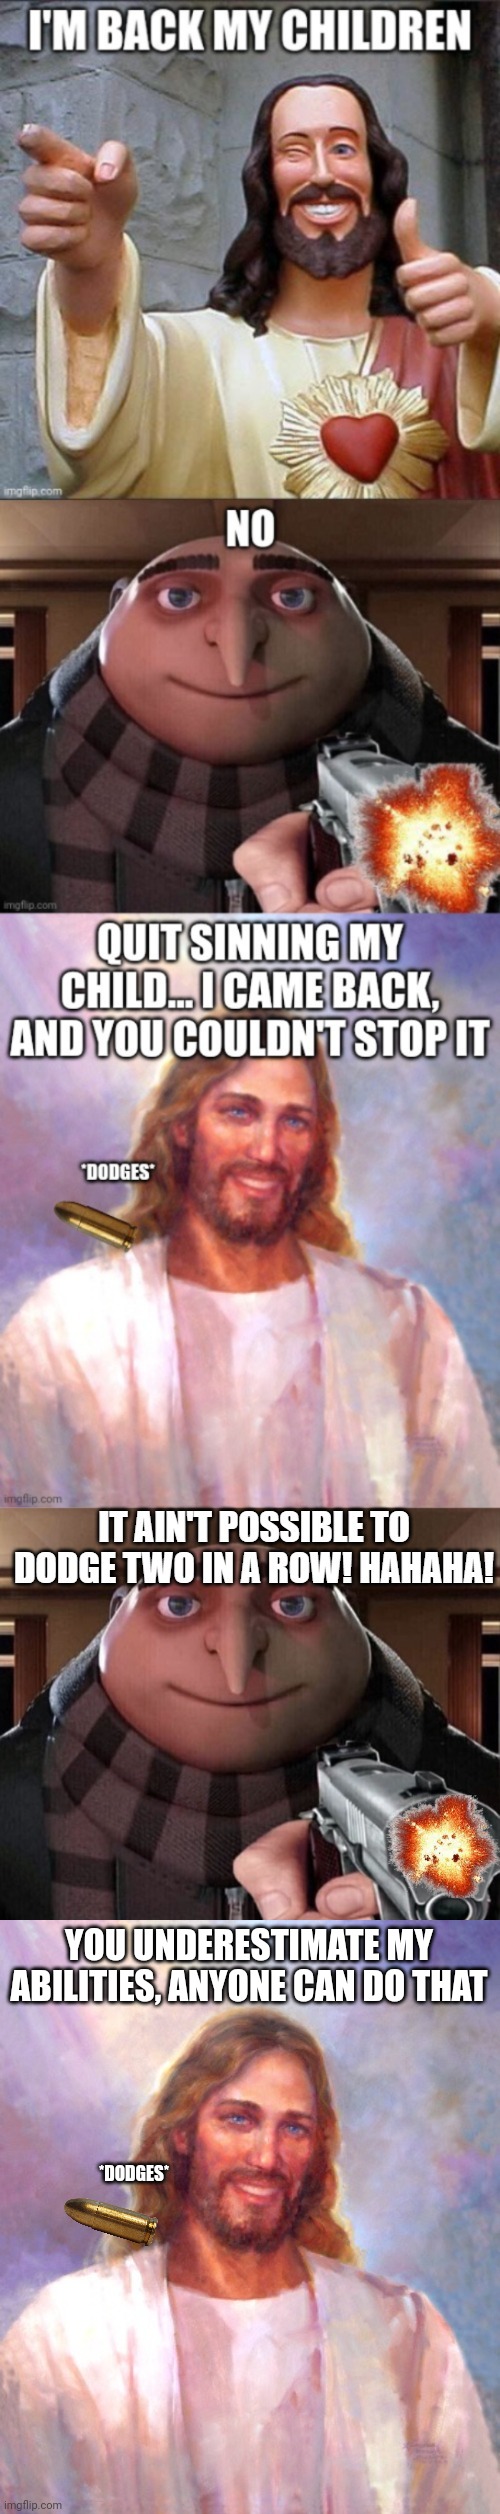 Anyone can dodge two bullets, and they don't instantly kill | YOU UNDERESTIMATE MY ABILITIES, ANYONE CAN DO THAT; *DODGES* | image tagged in memes,smiling jesus | made w/ Imgflip meme maker